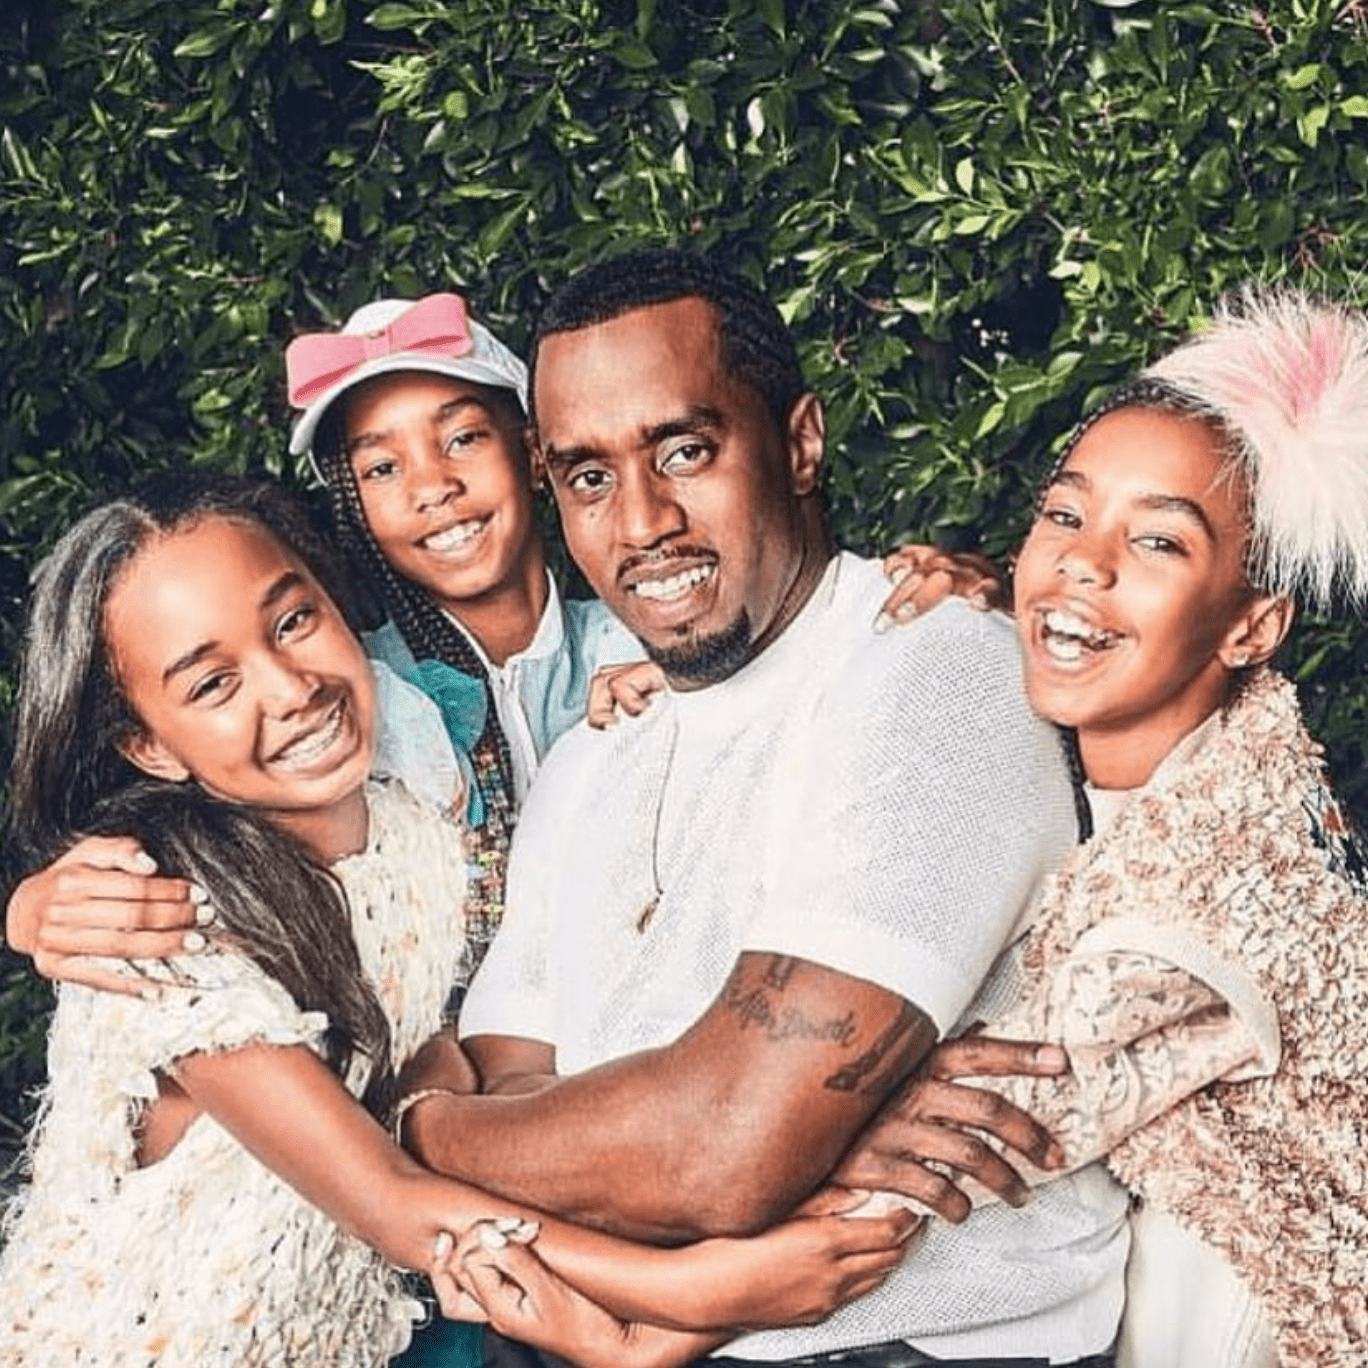 ”diddy-is-the-proudest-dad-he-praises-daughters-by-introducing-supergroup-the-combs-sisters-see-the-video”